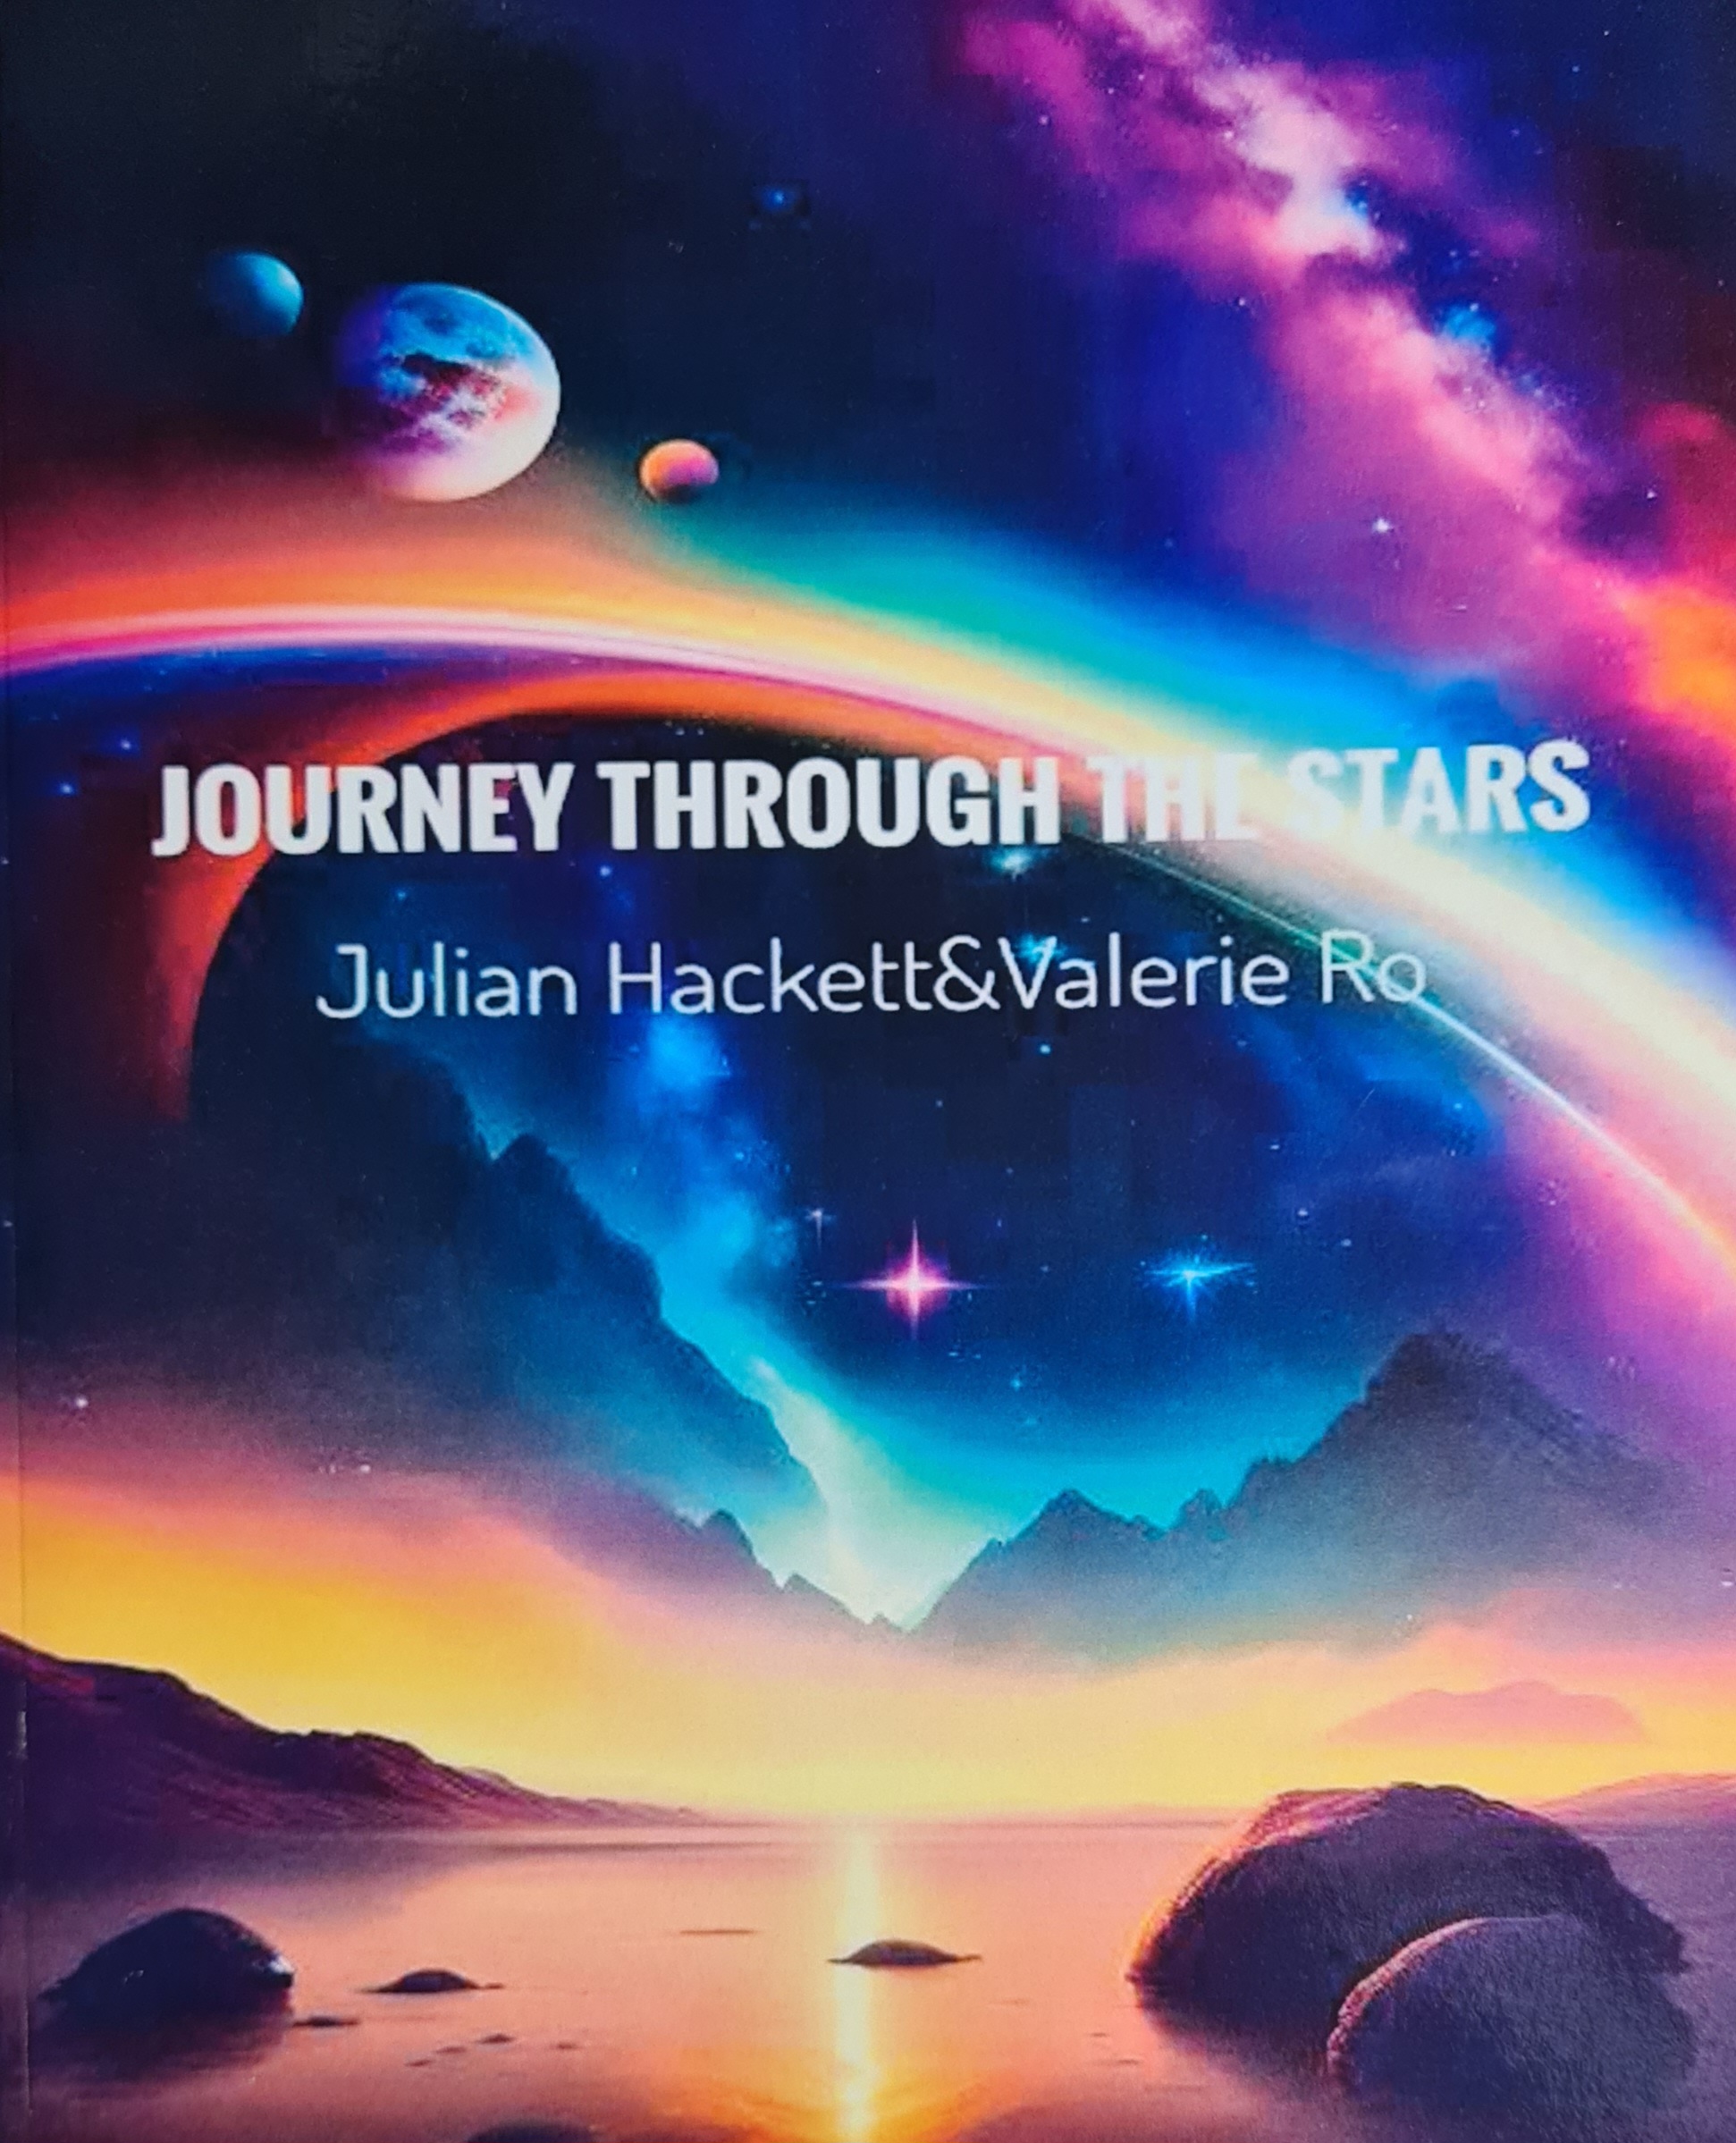 Journey Through the Stars – Book Launch Event at Barton Marina.